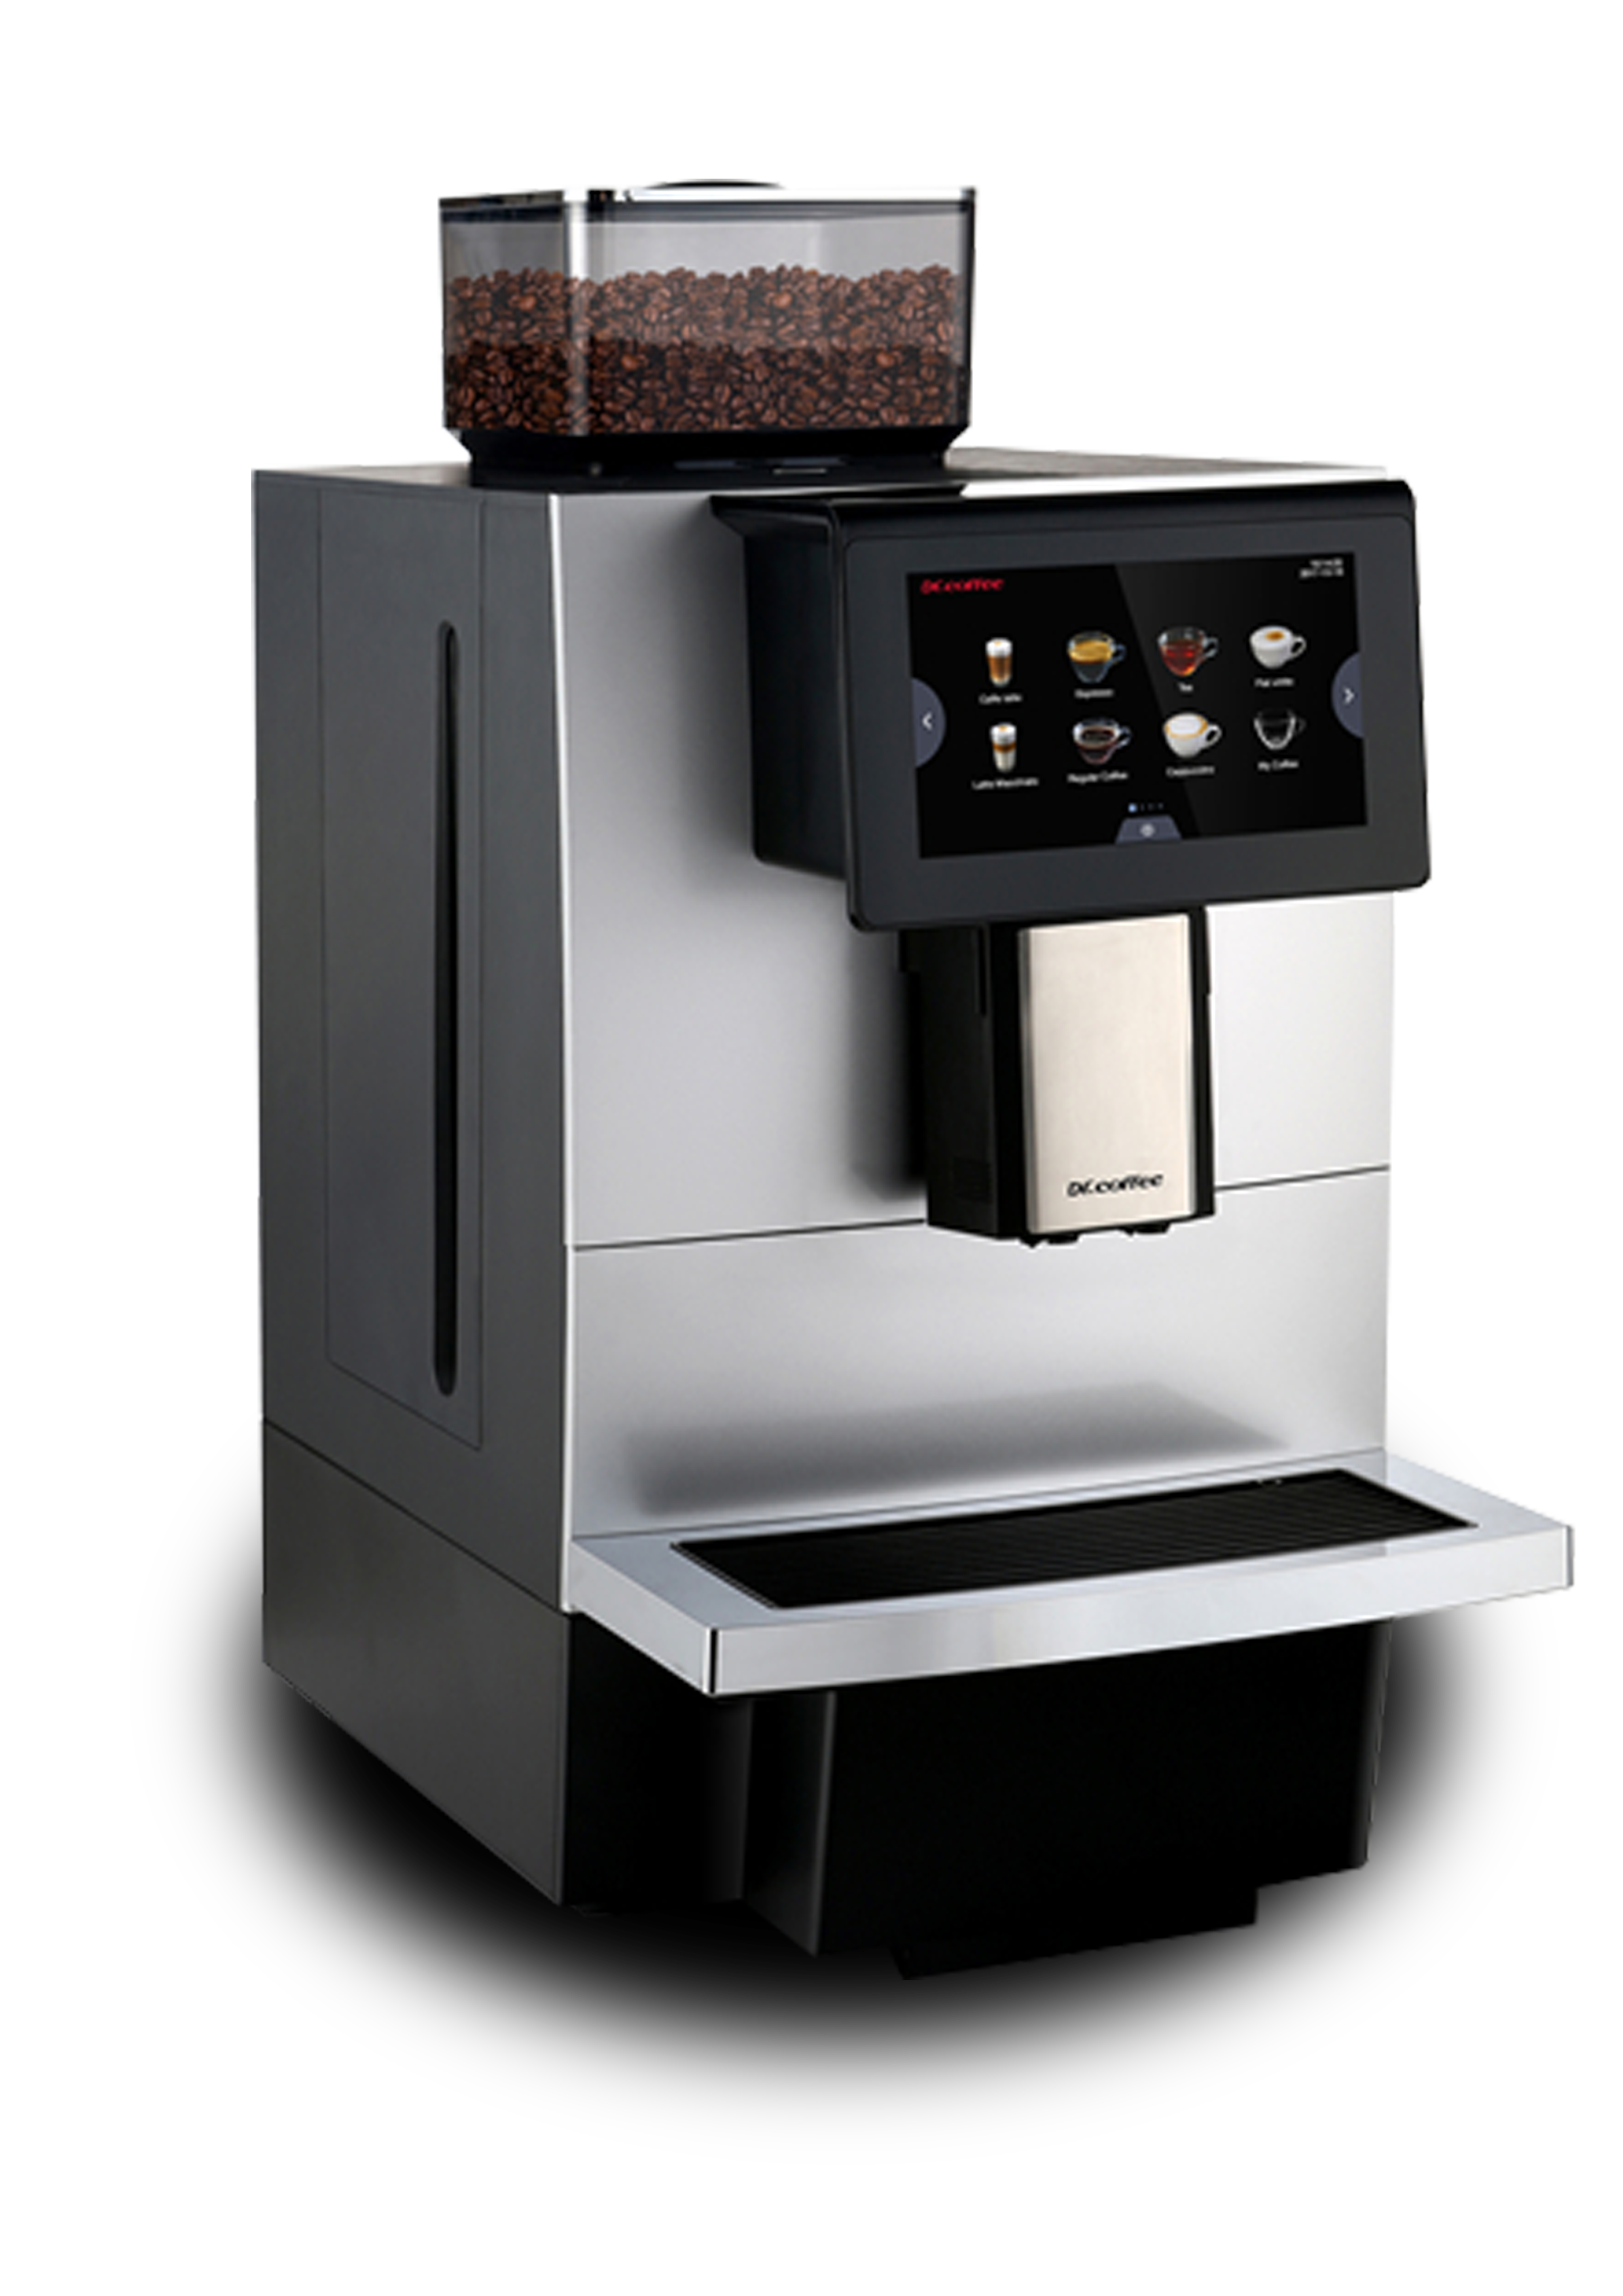 Dr. Coffee F11 – Plumbed